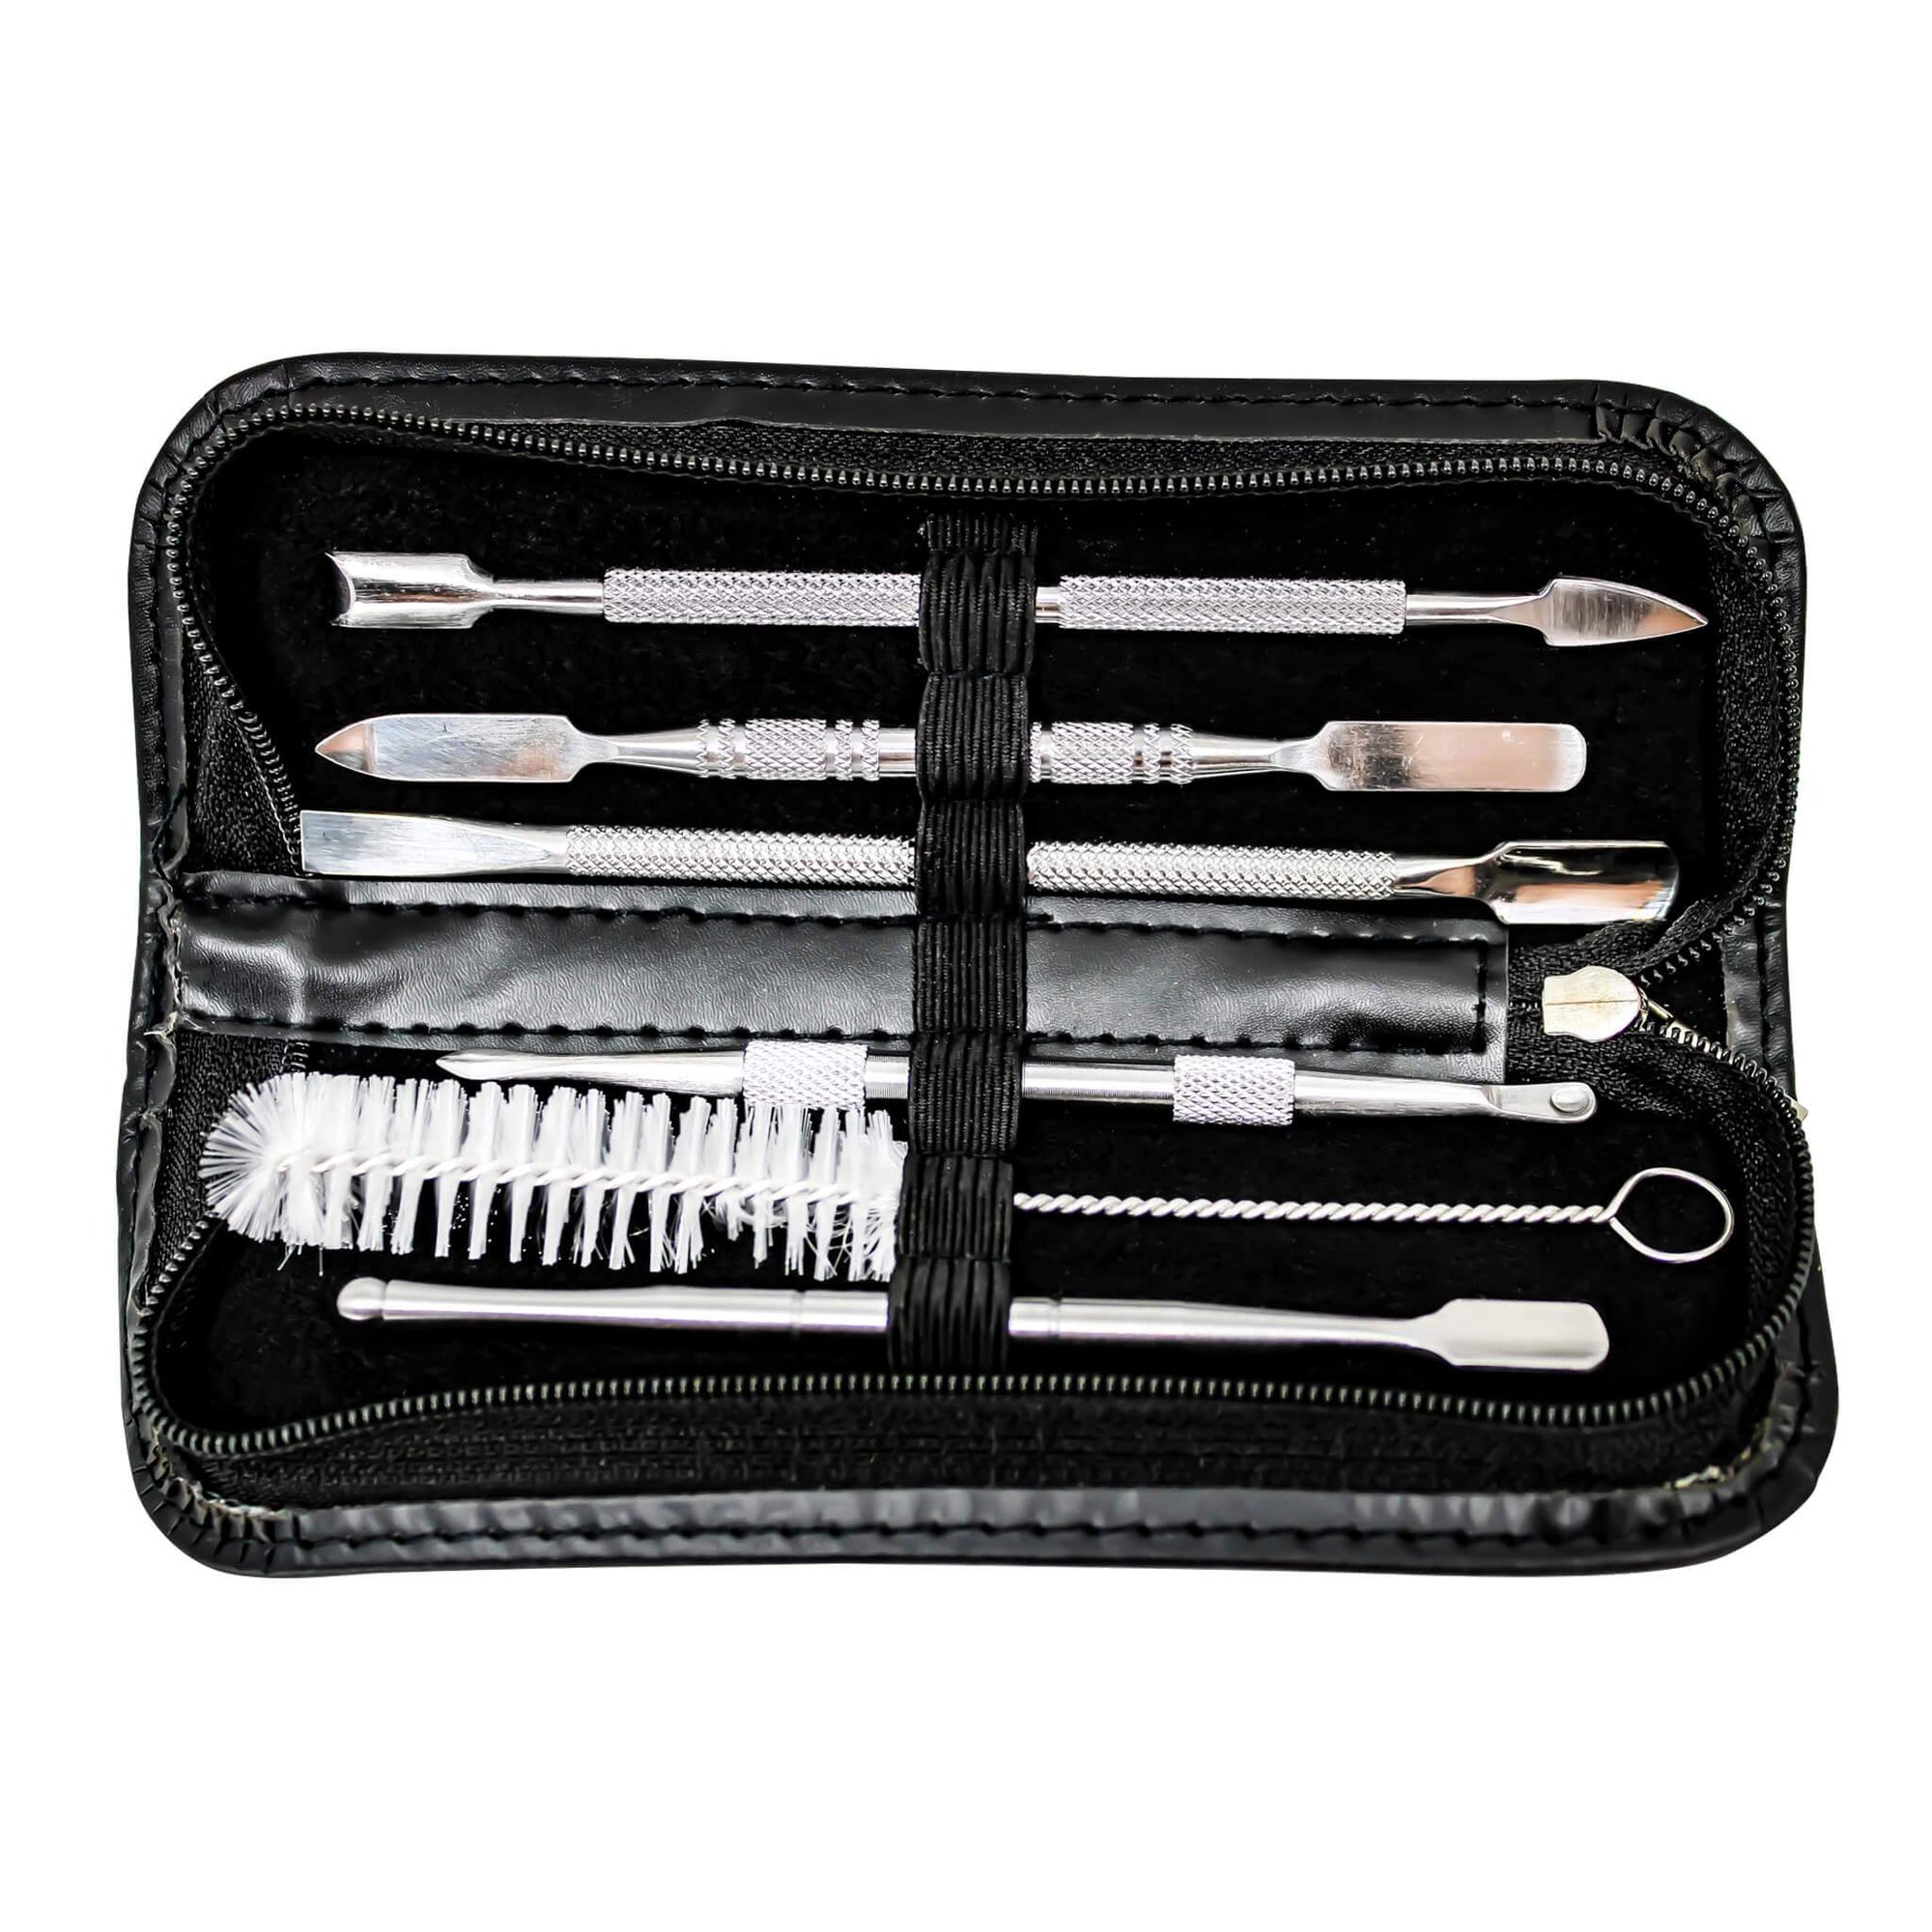 Dabber Tool Set All-In-One Case | Case Open Vertical View | the dabbing specialists